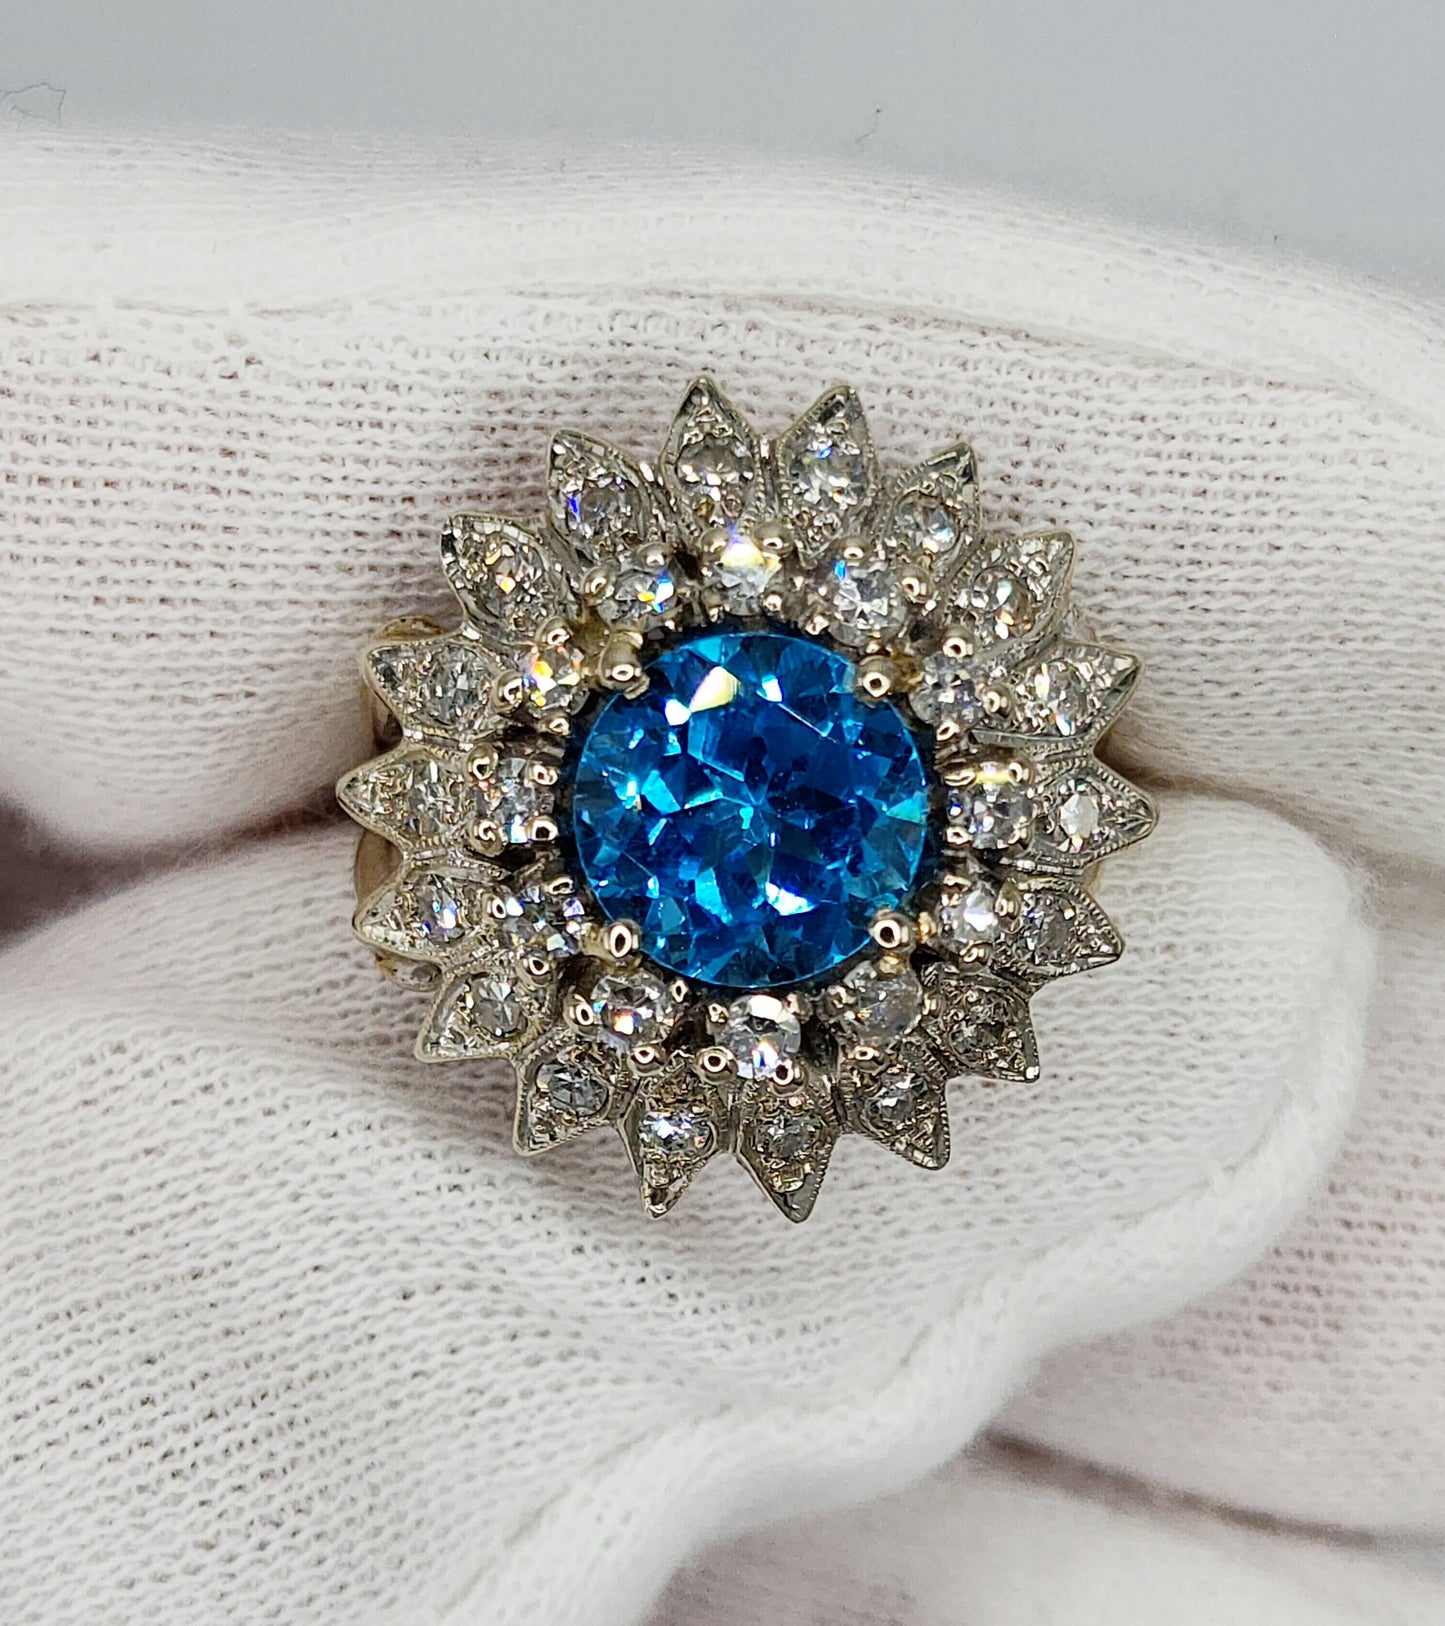 Blue Topaz and Diamond Cocktail Ring in 14k White Gold